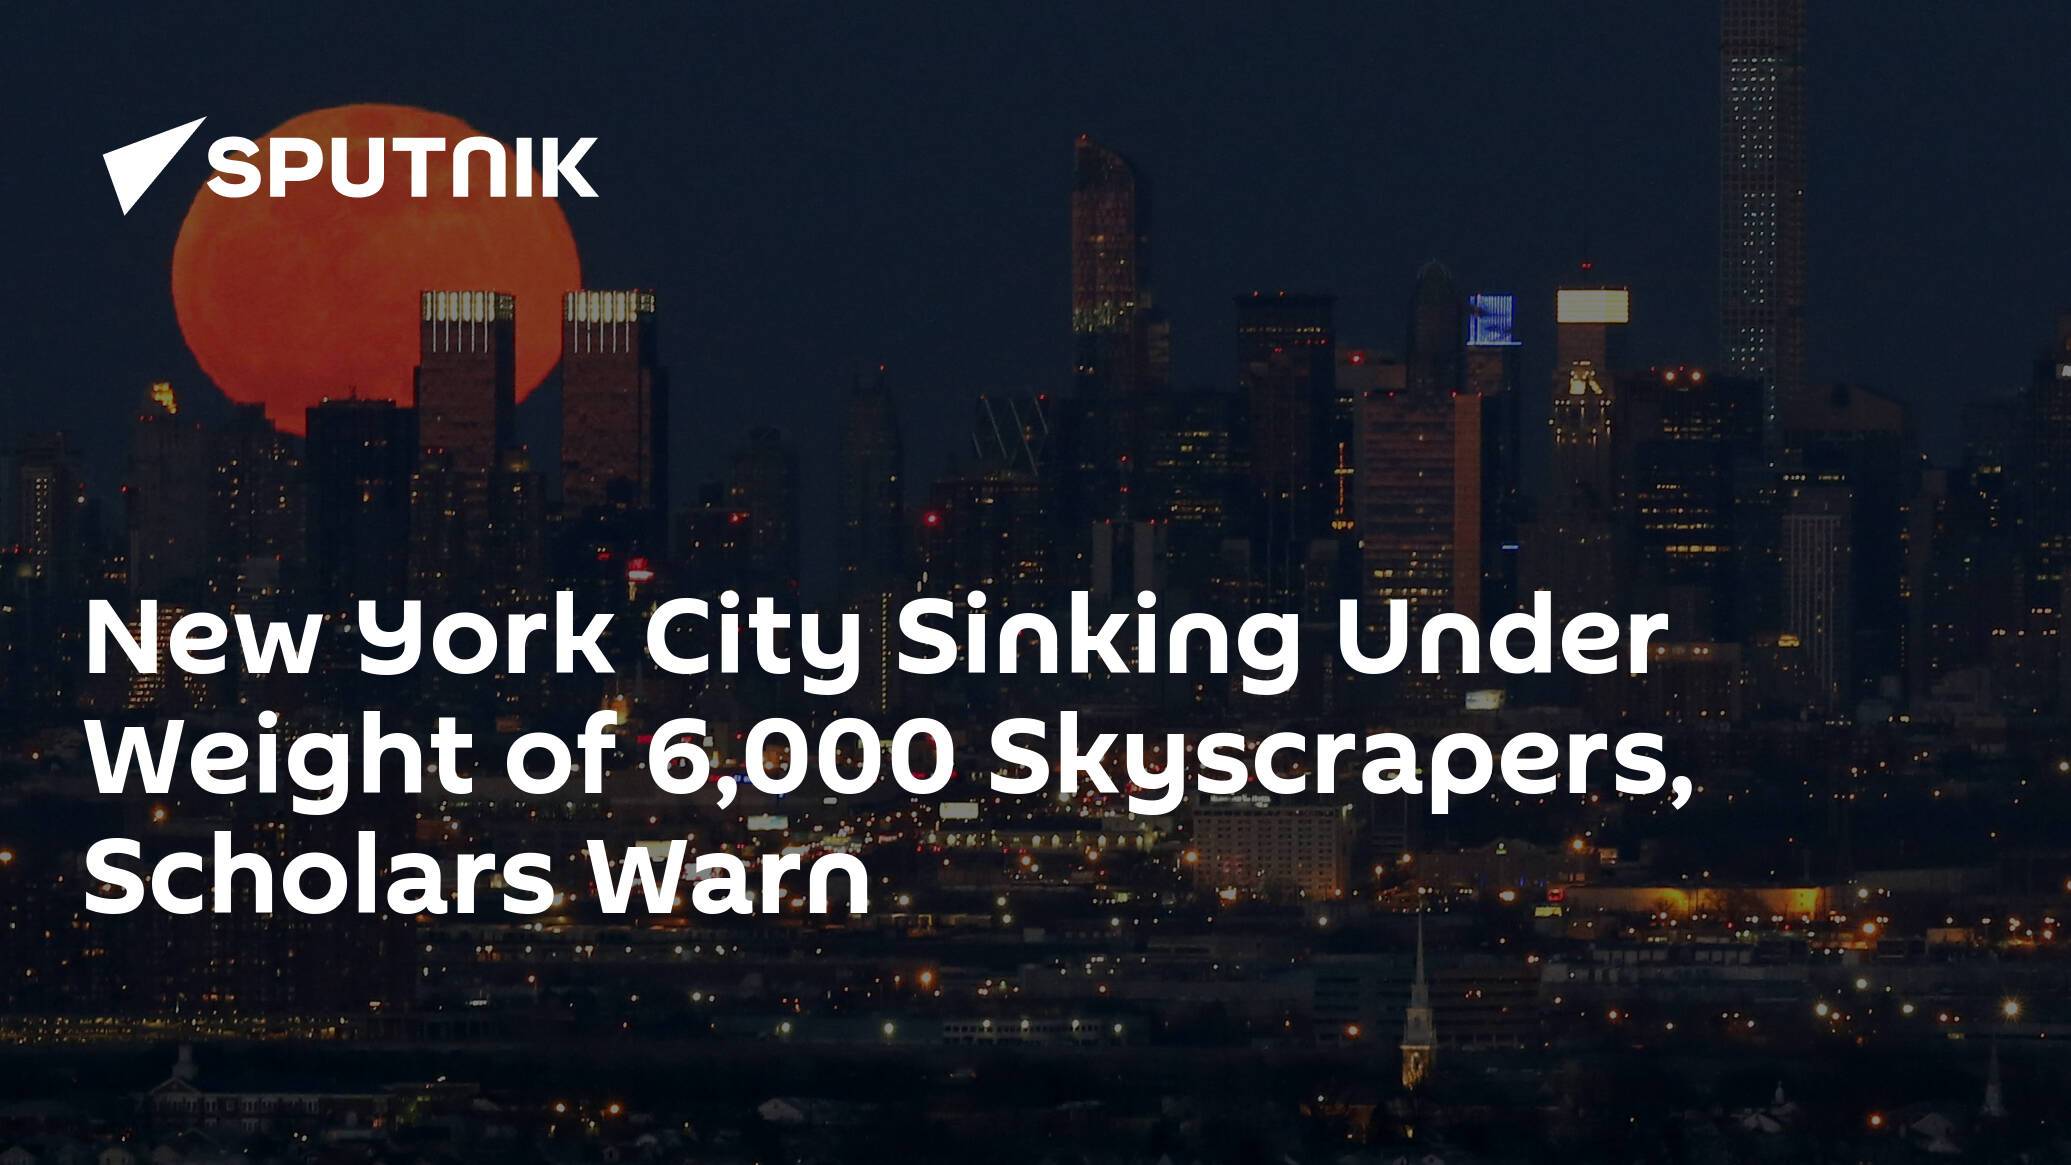 NYC is sinking under the weight of its skyscrapers, new study warns -  National